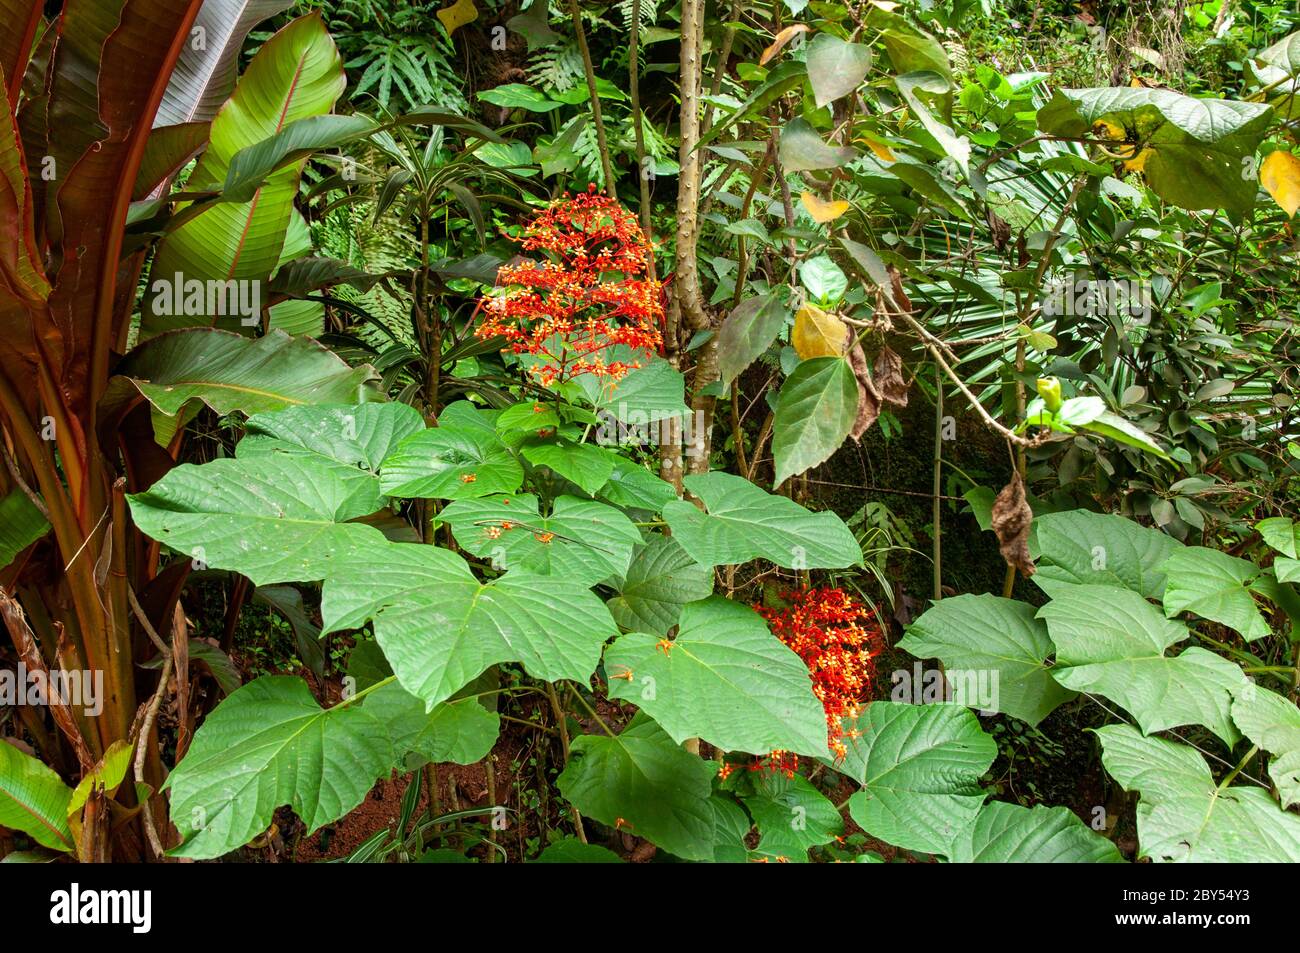 A beautiful red tropical flower, Pagoda-Flower (Clerodendrum paniculatum). Seychelles. Stock Photo